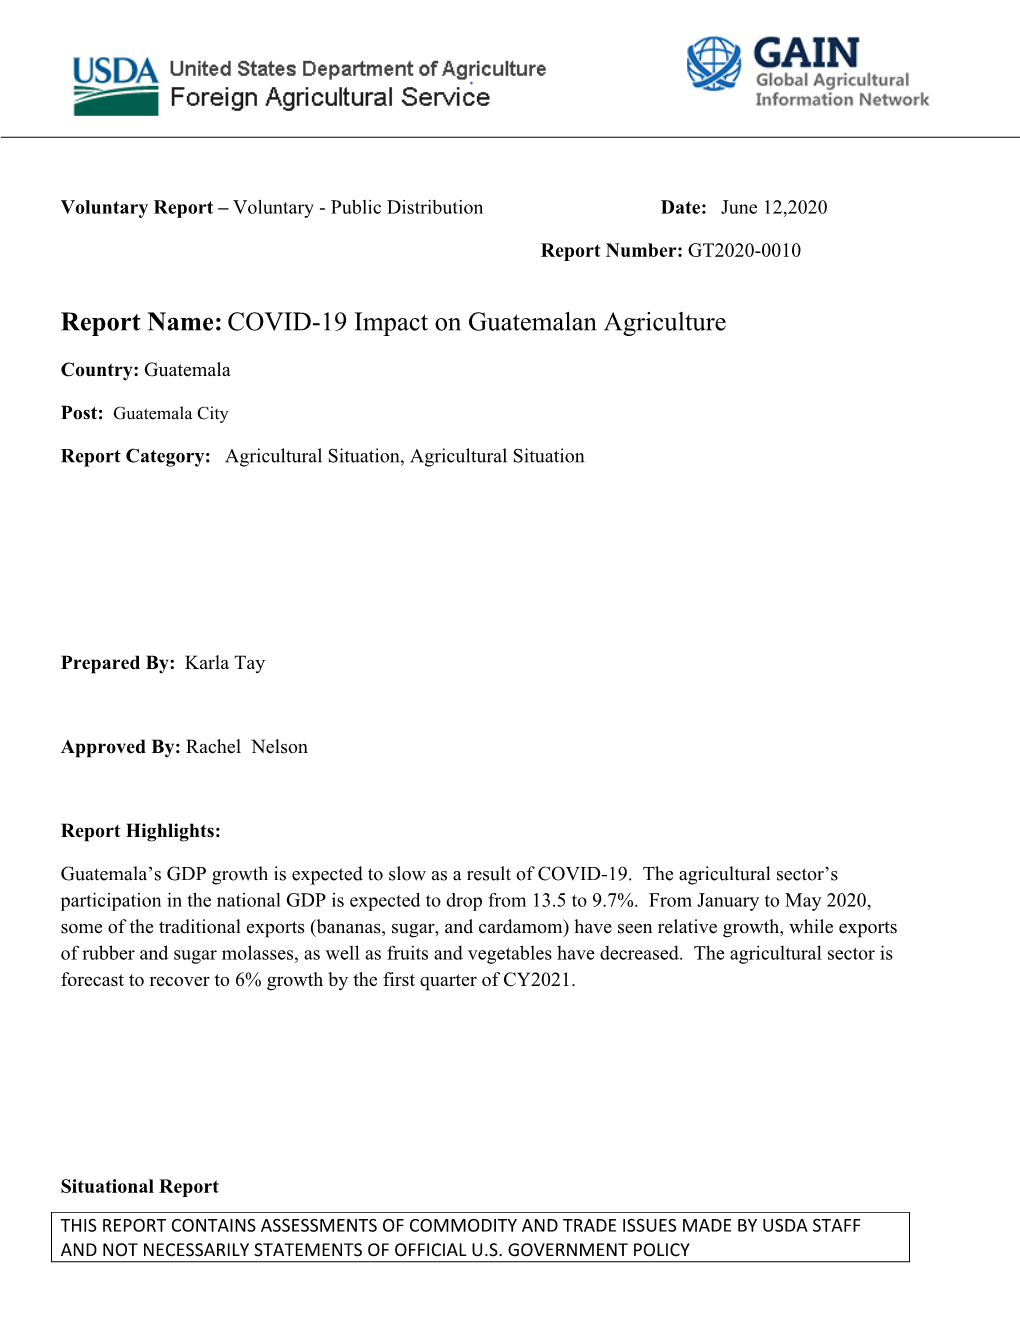 COVID-19 Impact on Guatemalan Agriculture